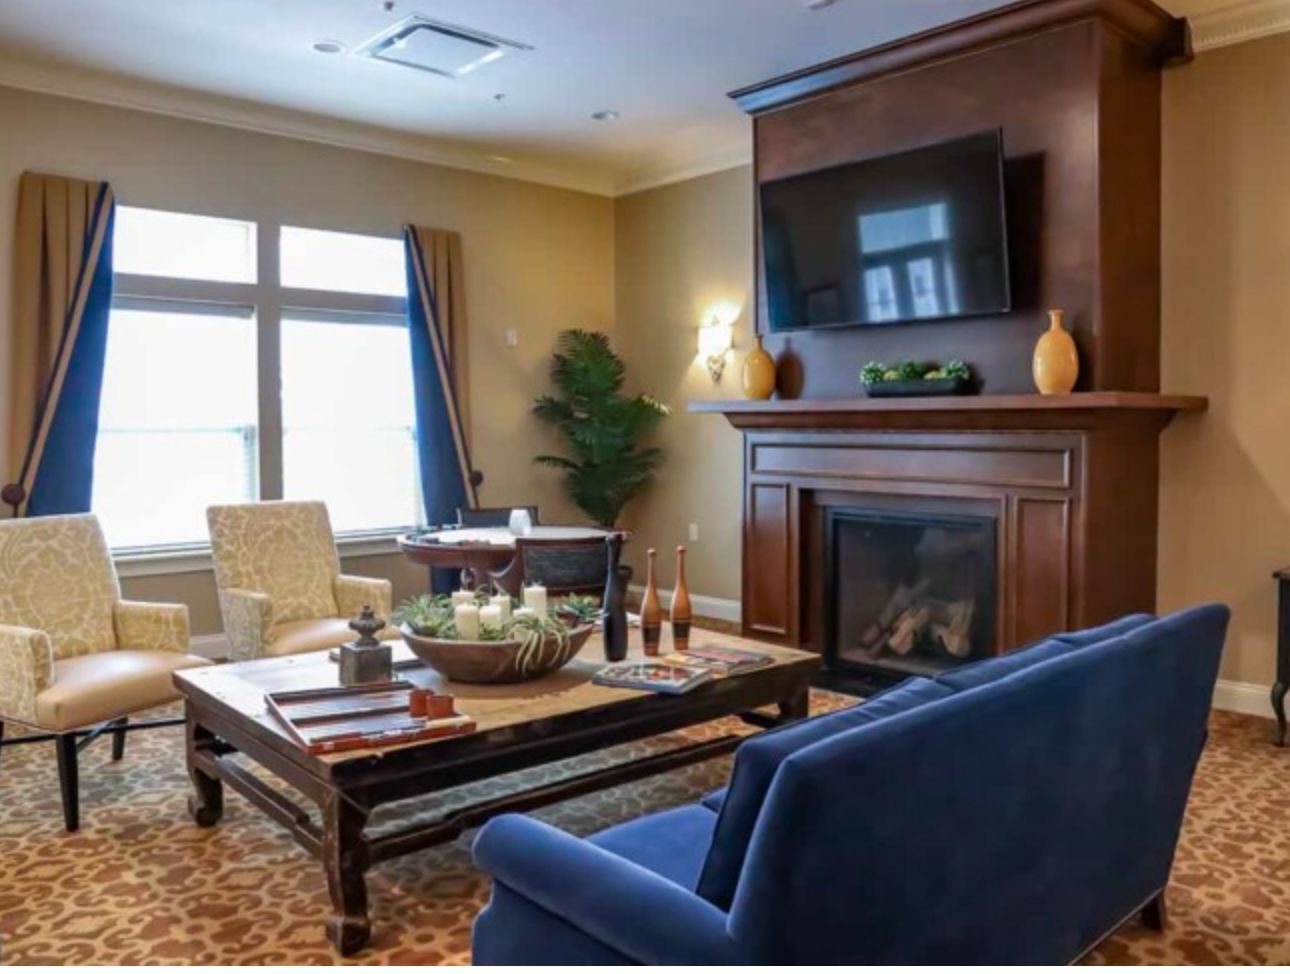 Interior view of Quincy Place Senior Living room with modern furniture, fireplace, and computer setup.